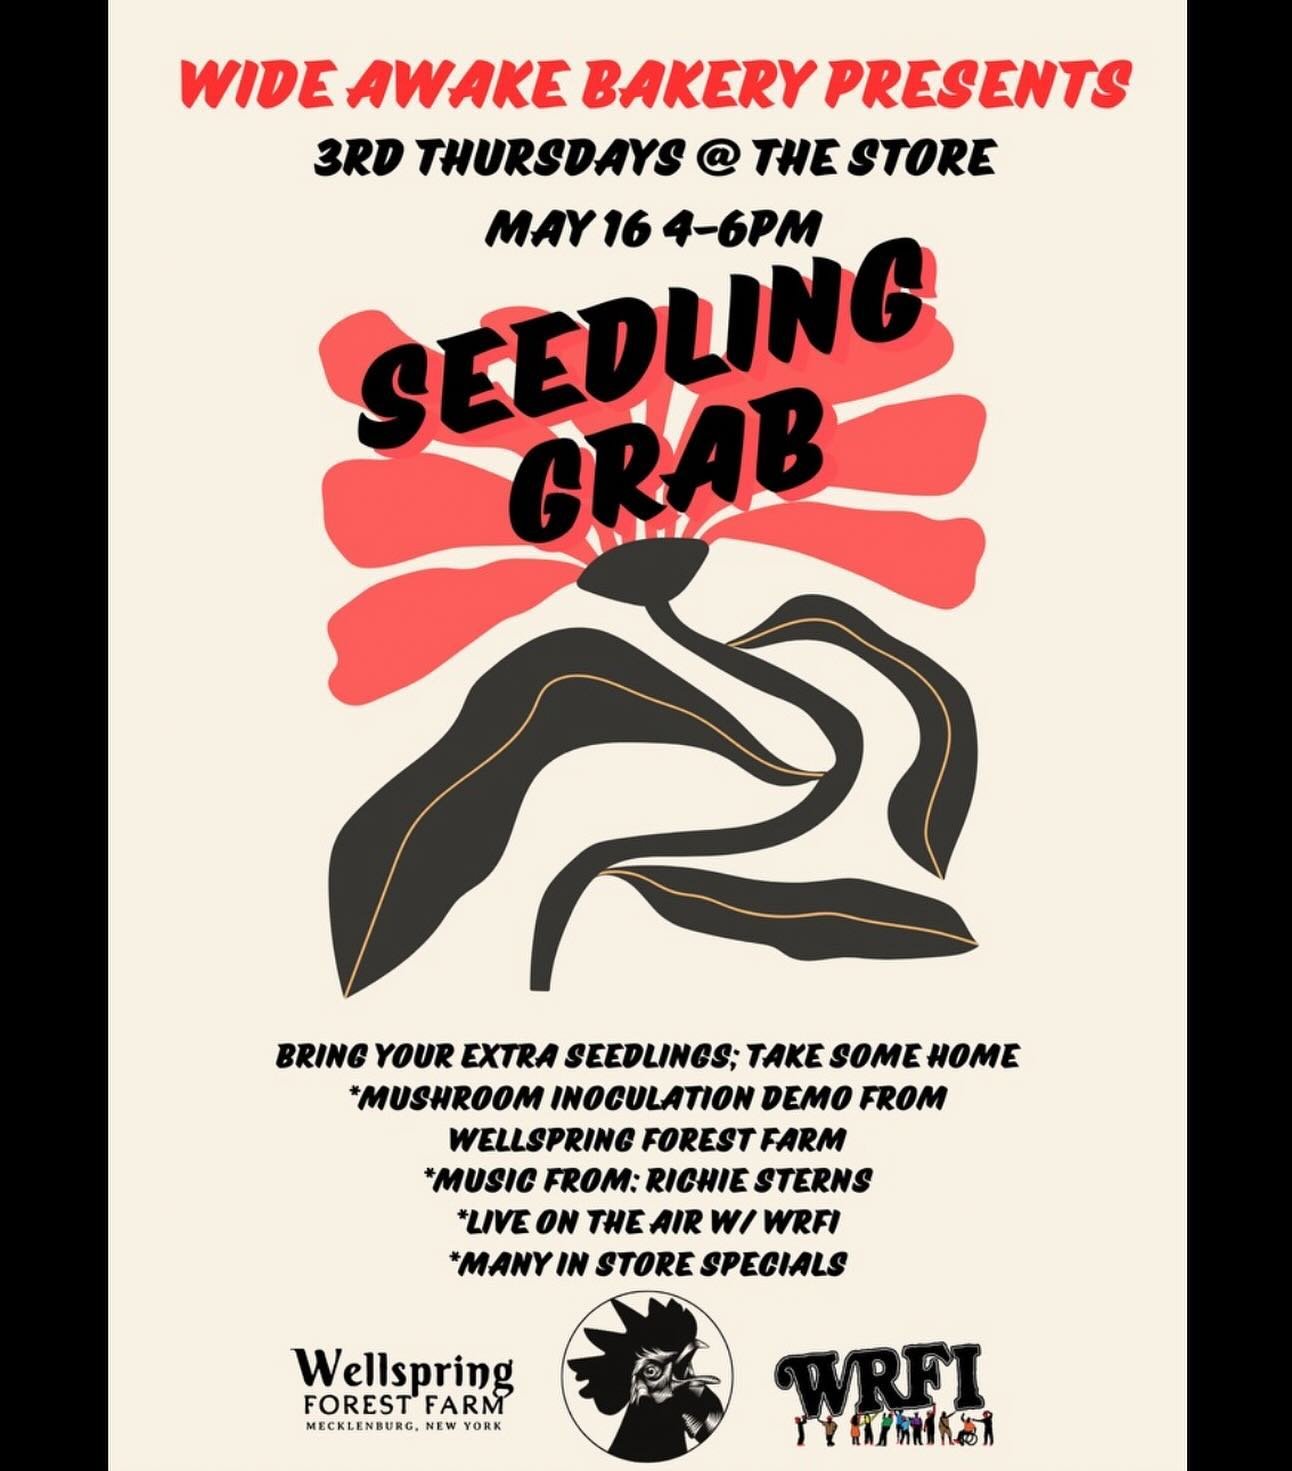 Join us next Thursday for a super springy 3rd Thursday! 🌱Seedling Grab! 🌱 Bring your extra starts to swap, and get your garden underway in a whirlwind of community support and exchange. Spread the word! We wanna see what kinda weird veggies y&rsquo